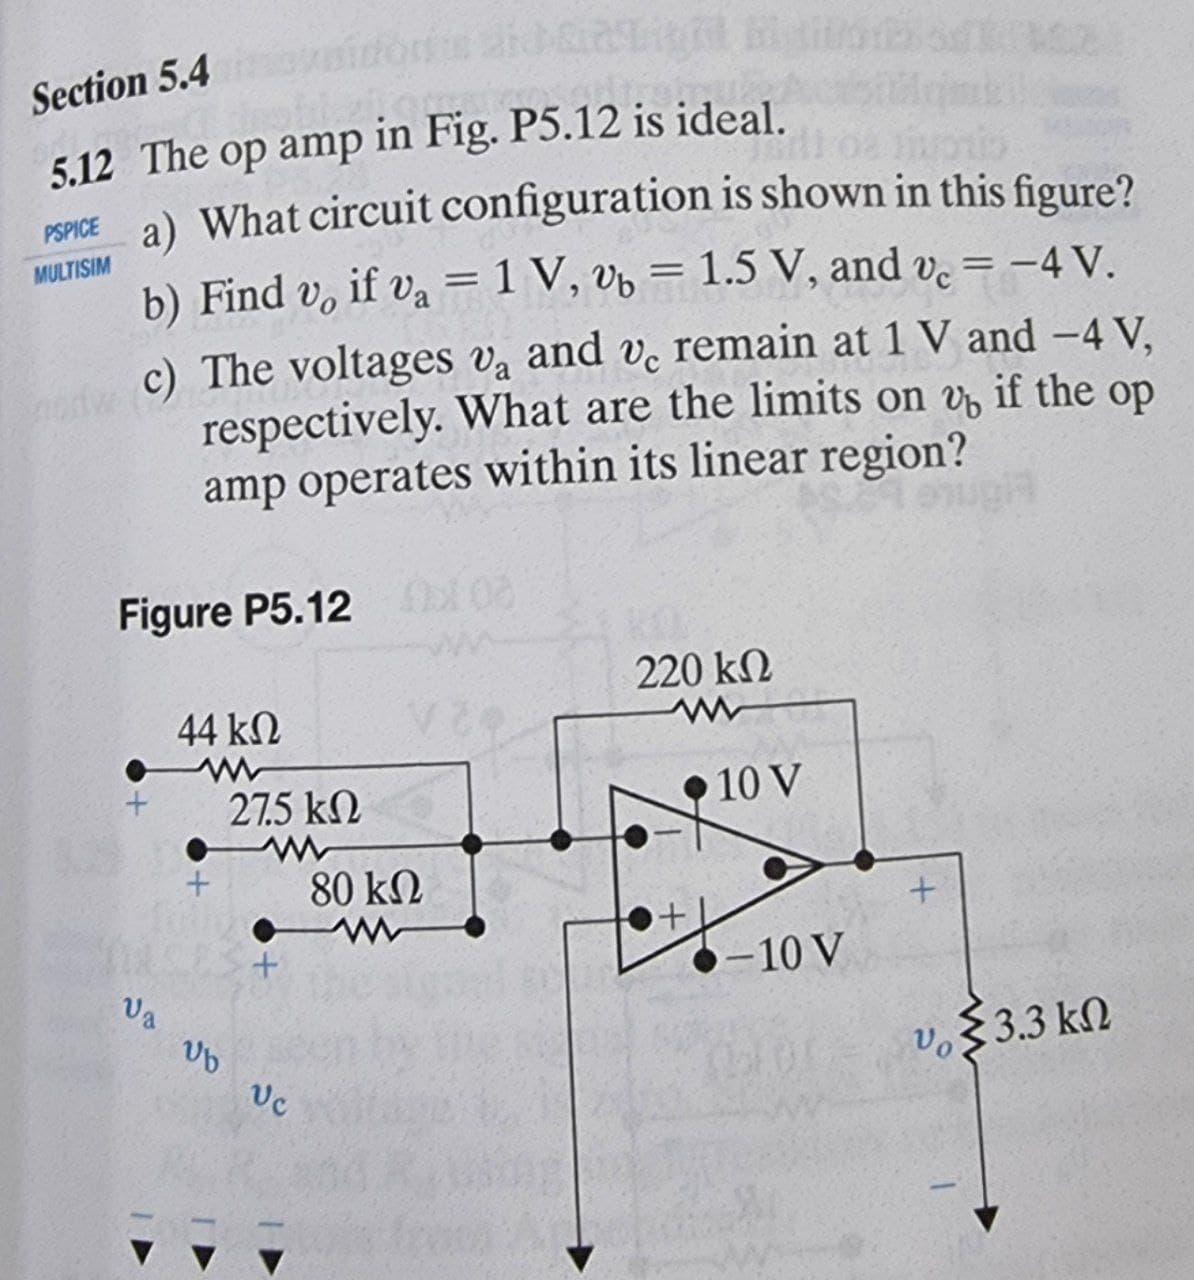 Section 5.4
5.12 The op amp in Fig. P5.12 is ideal.
a) What circuit configuration is shown in this figure?
PSPICE
MULTISIM
b) Find v, if va = 1 V, vb = 1.5 V, and v. = -4 V.
%D
c) The voltages va and v. remain at 1 V and -4 V,
respectively. What are the limits on v, if the op
amp operates within its linear region?
Figure P5.12
20KU
220 k2
44 k2
27.5 kN
•10 V
80 kN
O-10 V
Va
Vo
$3.3 kN
